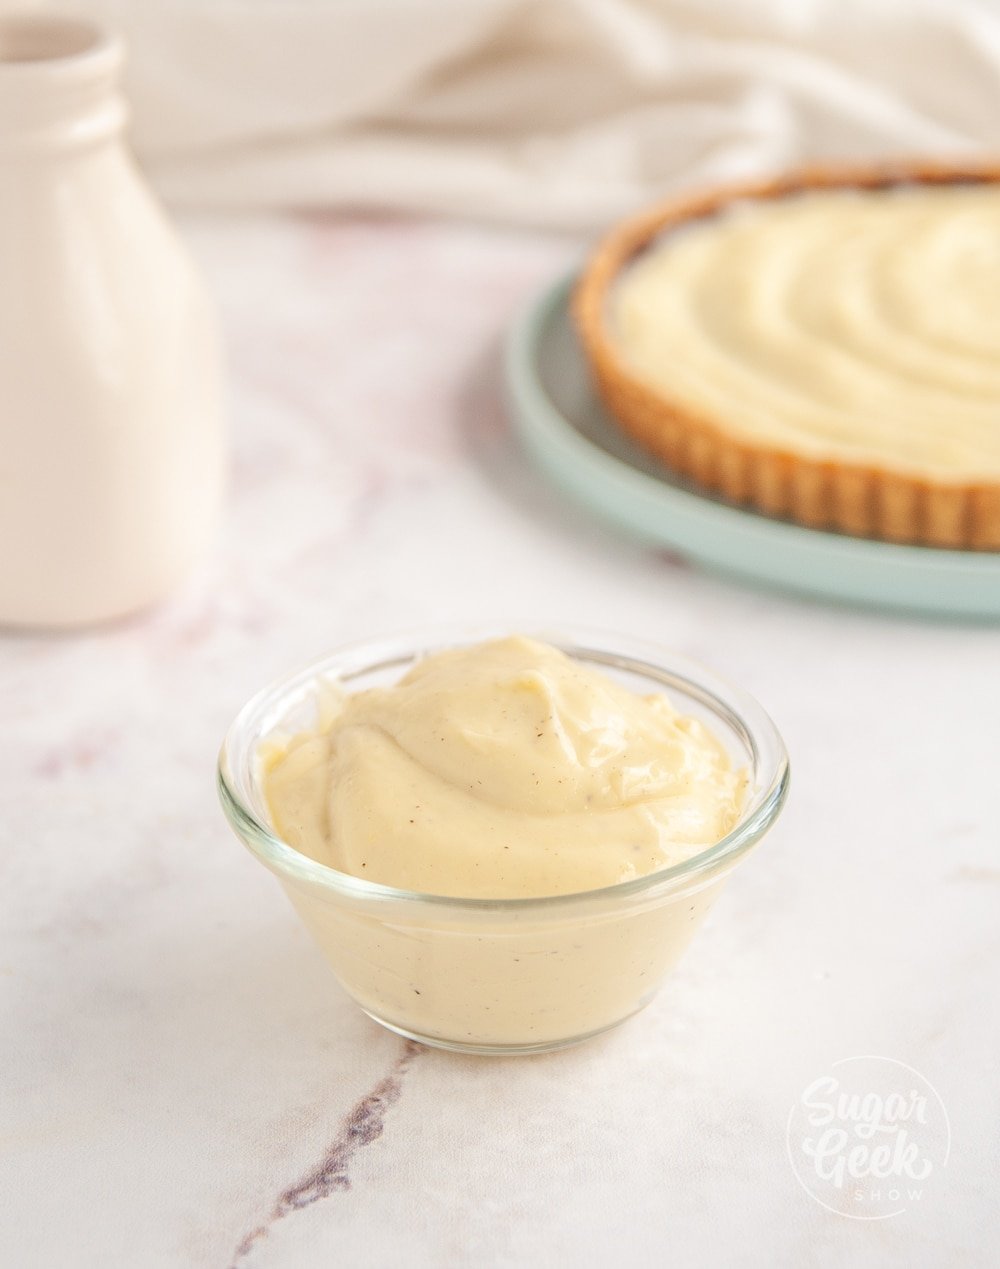 pastry cream in a small glass bowl with tart in the background